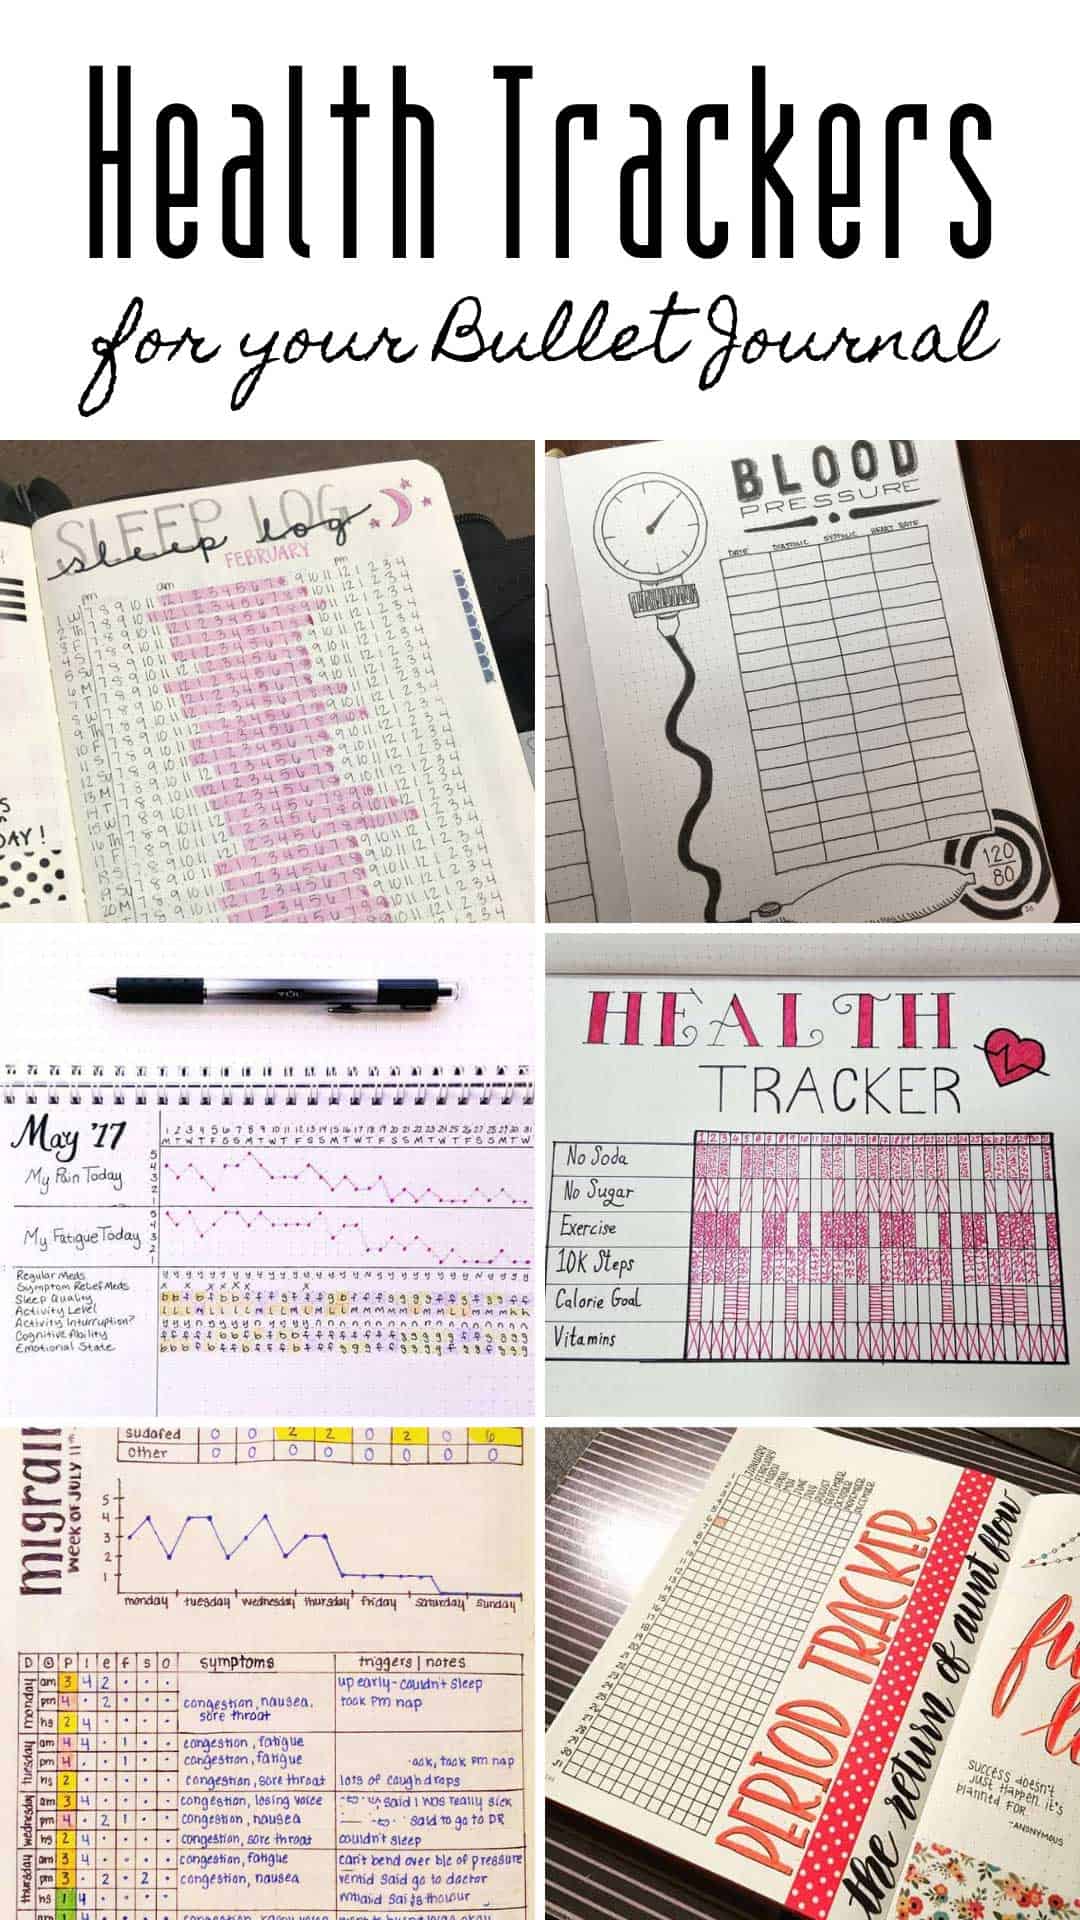 It's time to start putting your wellness first with these health trackers for your bullet journal